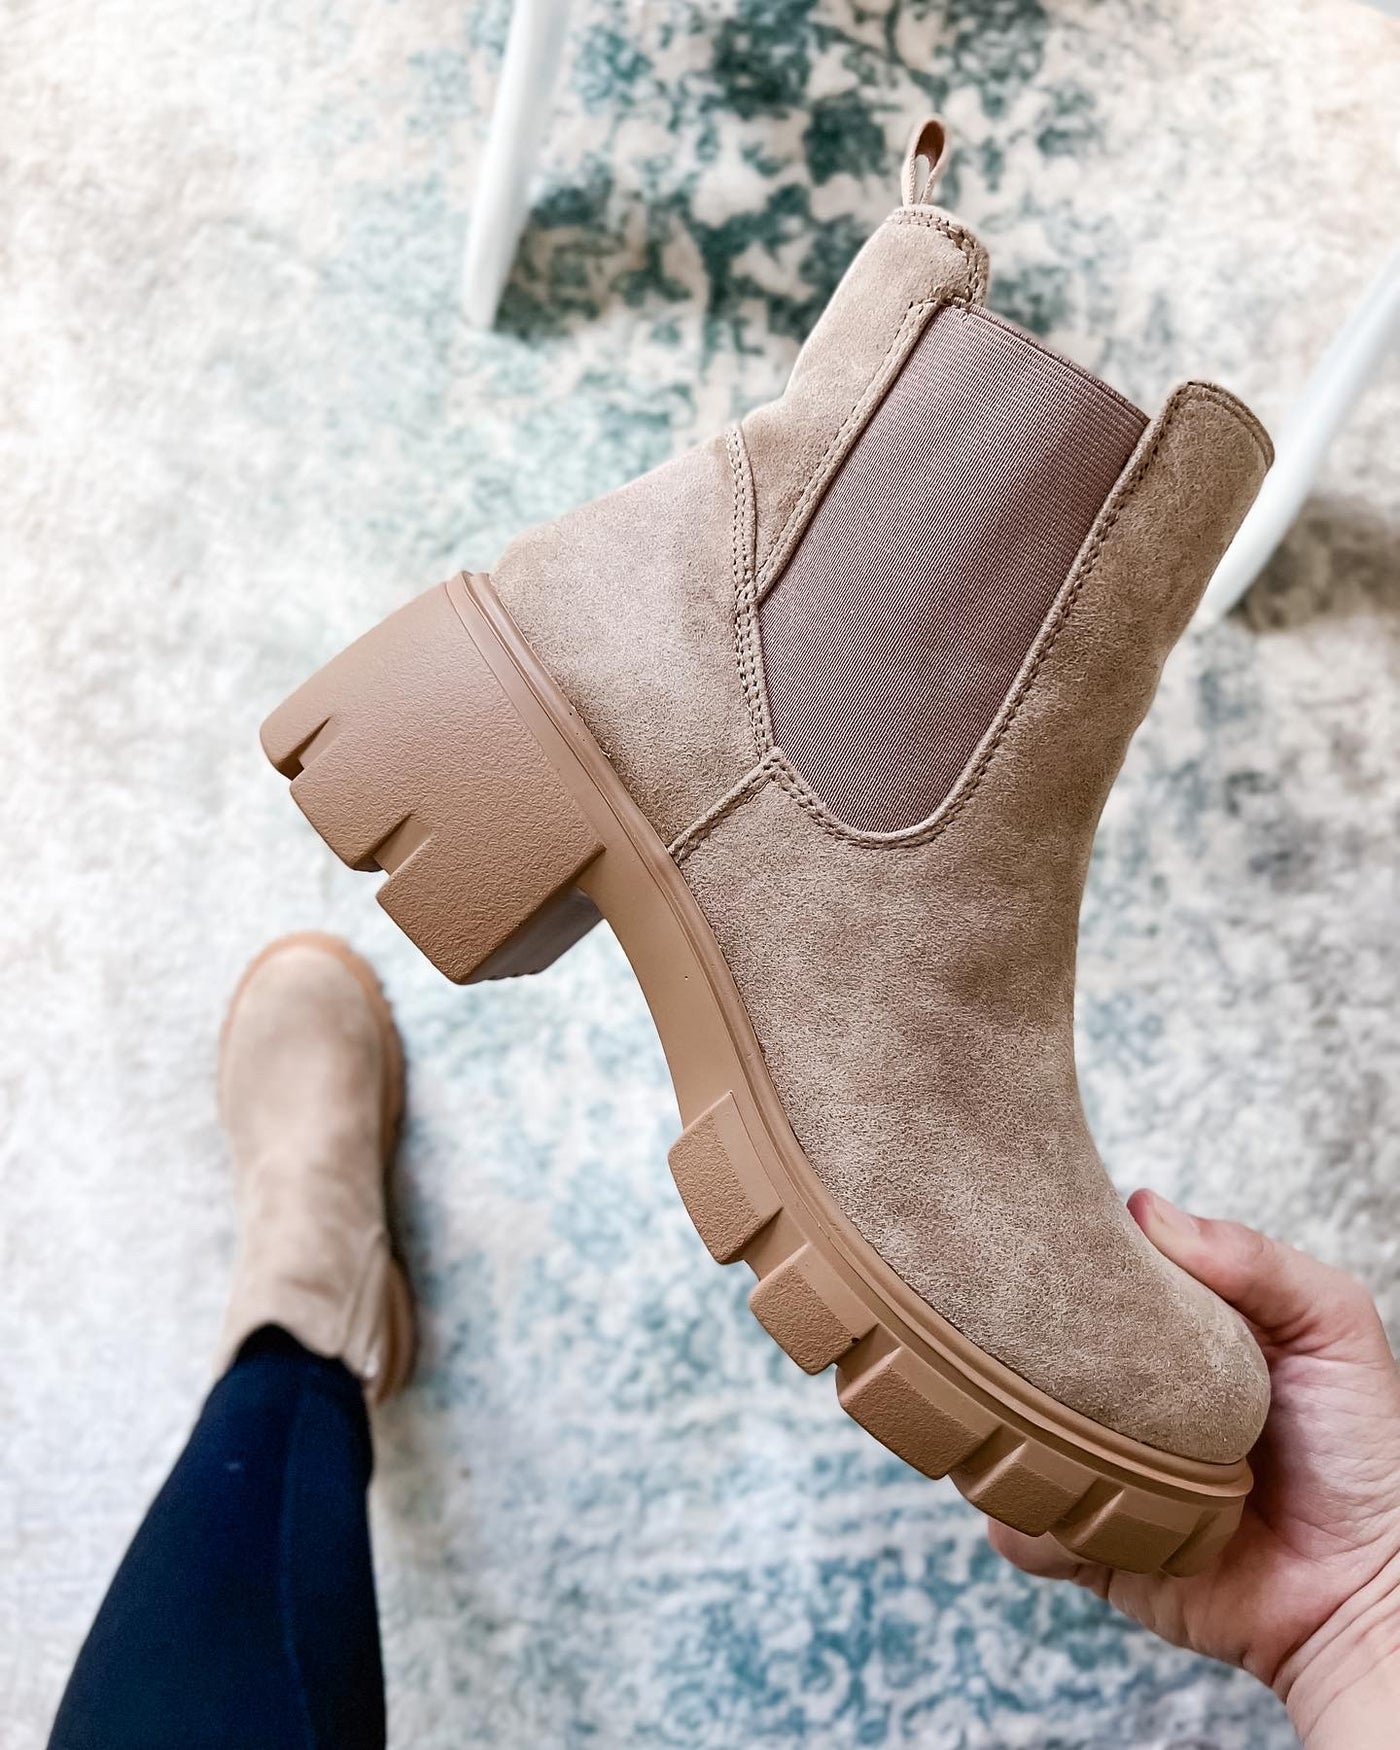 "Zoe" Chunky Boot by Very G, Taupe